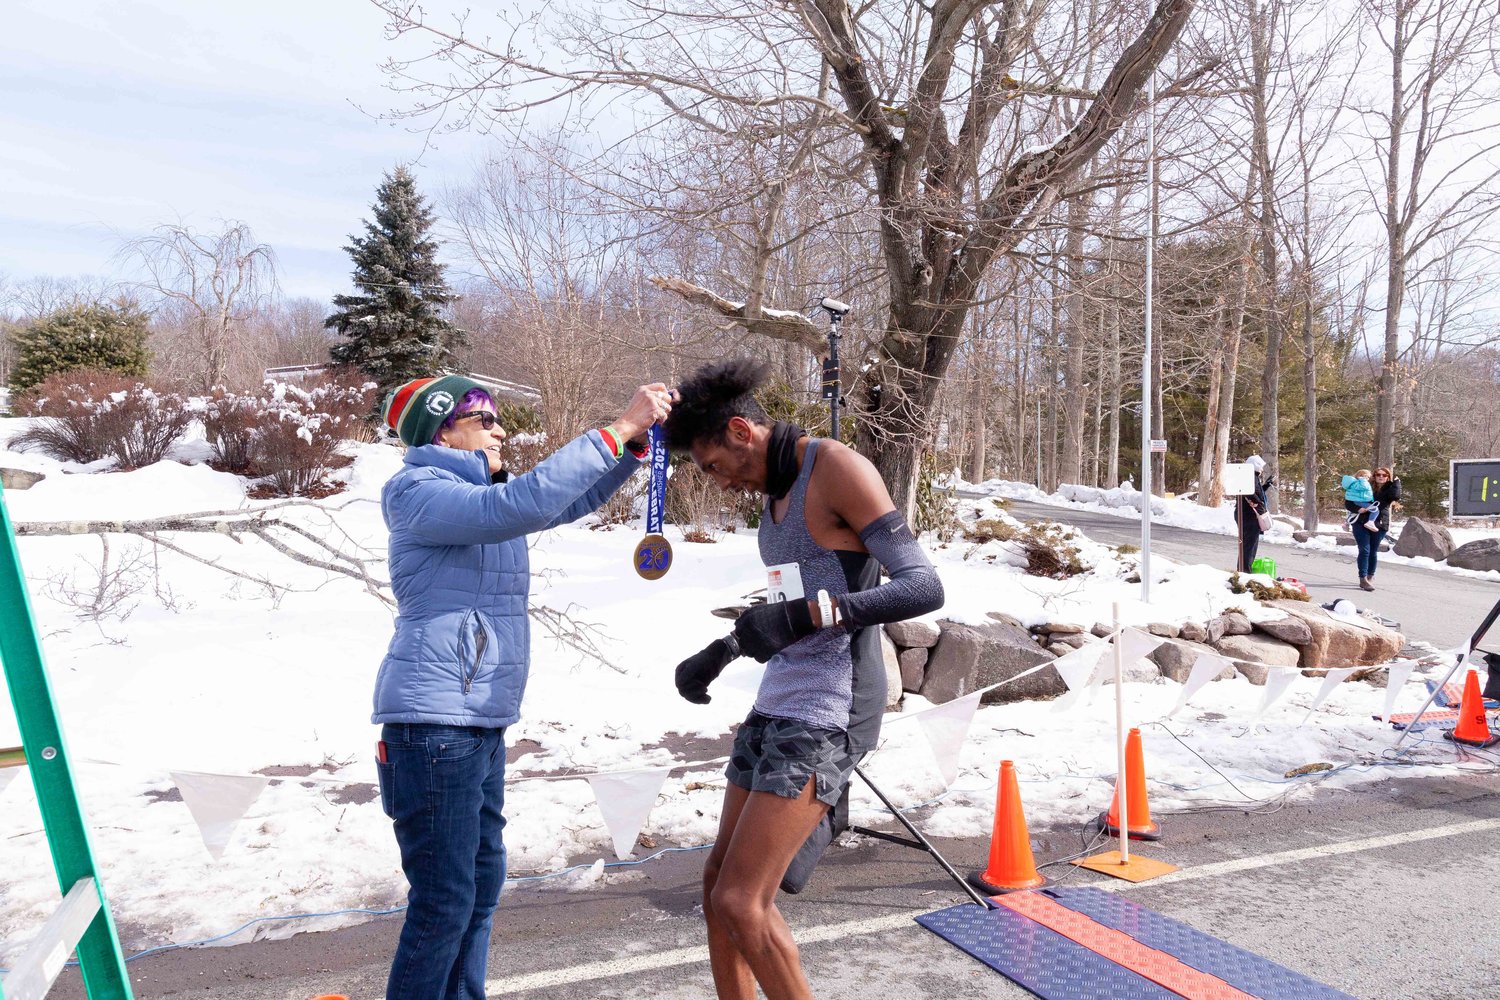 Myriam Loor, the race director, welcomes the Forestburgh resident Evan Waterton as he crosses the finish line in first place.